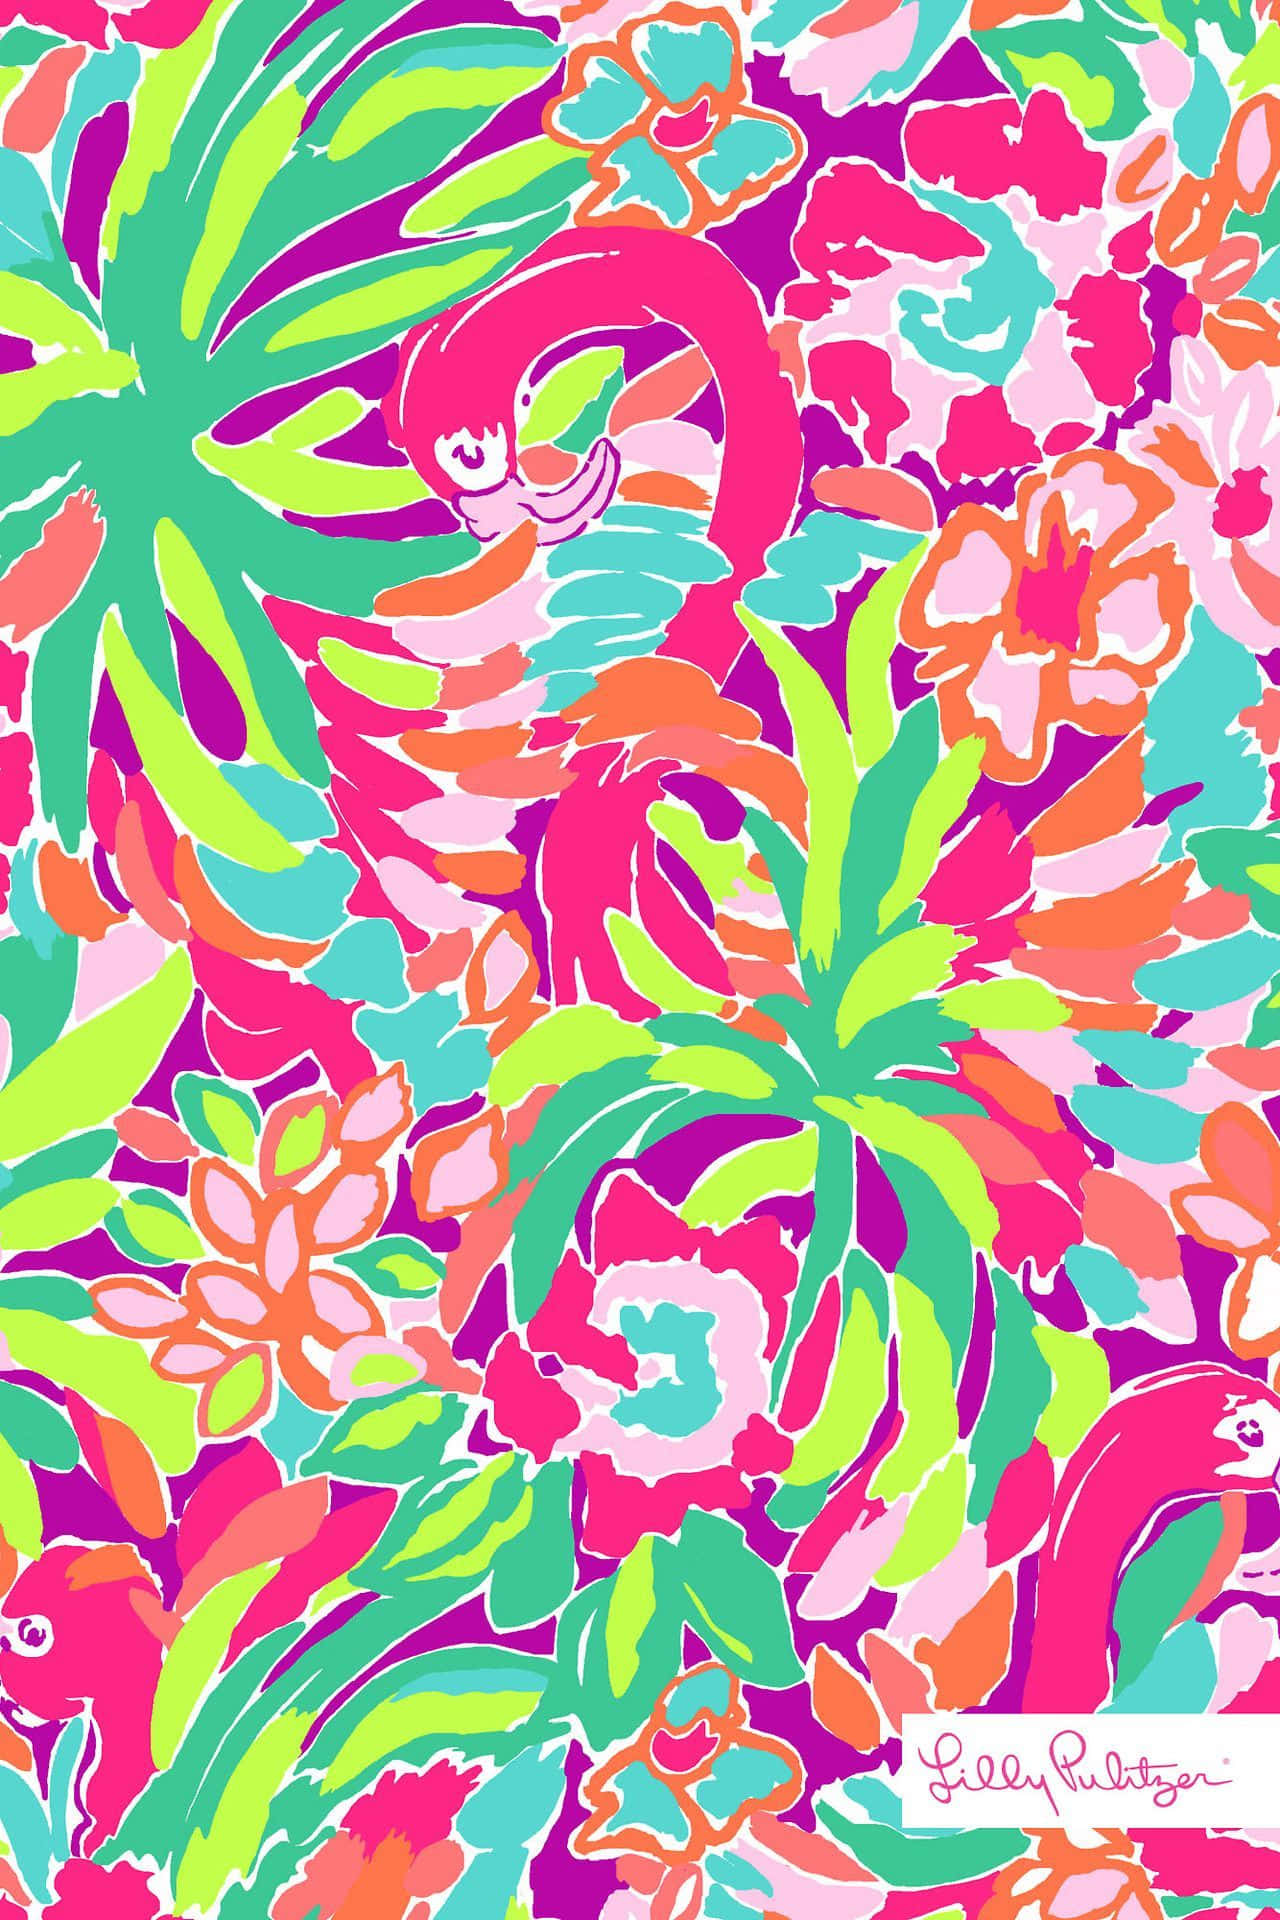 Add a touch of bold pattern and bright color to your outfit with Lilly Pulitzer.